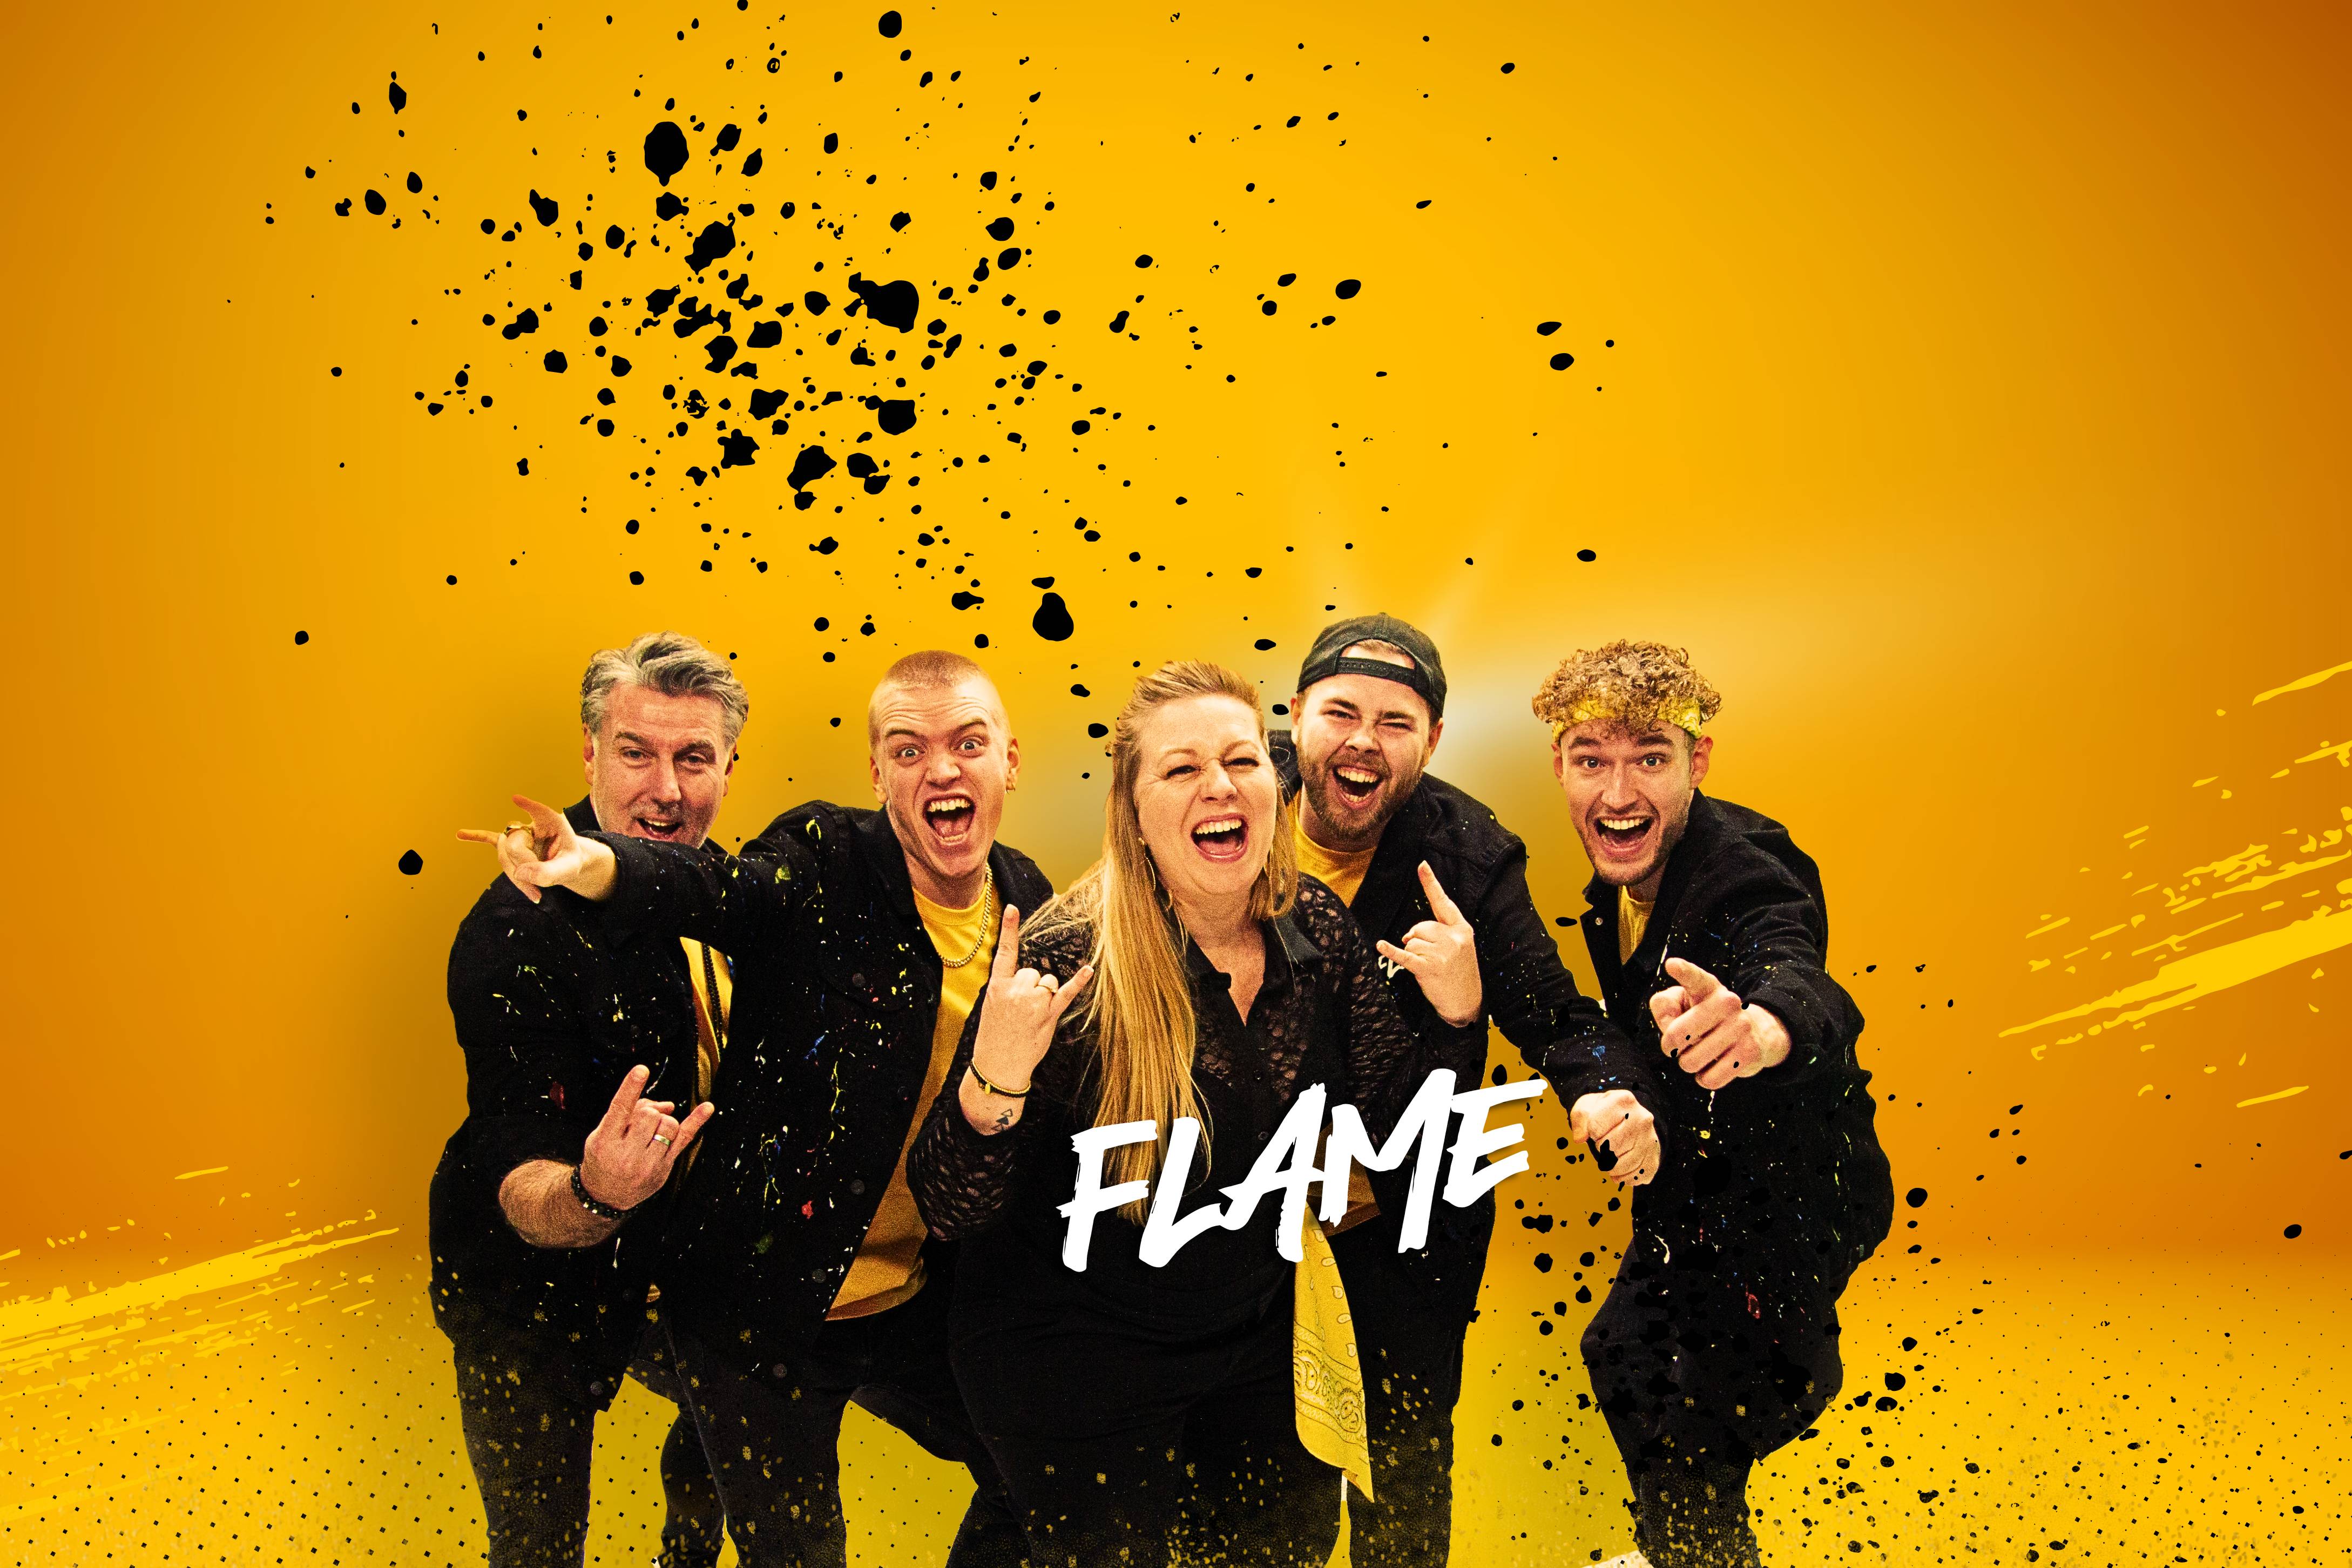 Flame coverband